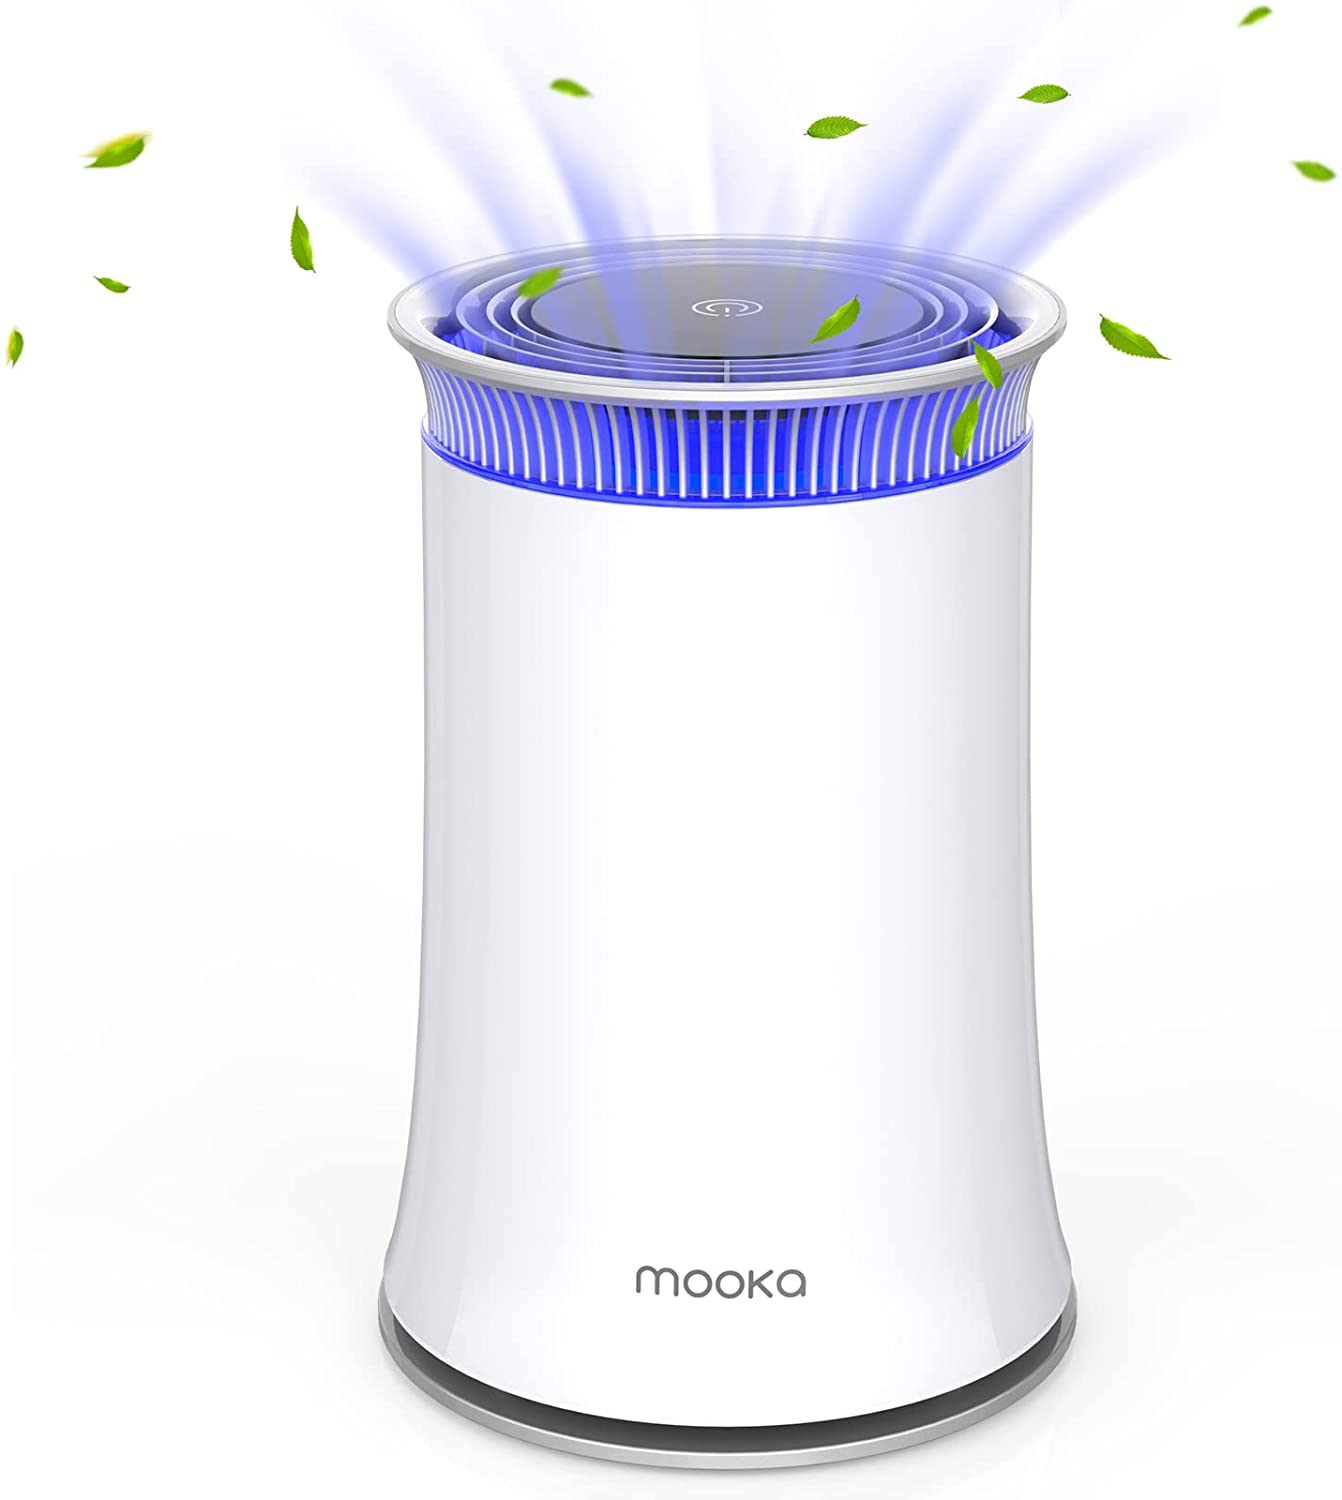 Mooka Air Purifier for Home, True HEPA Air Cleaner , Activated Carbon Filter, Up to 540 sqft, KJ120G-C10, White